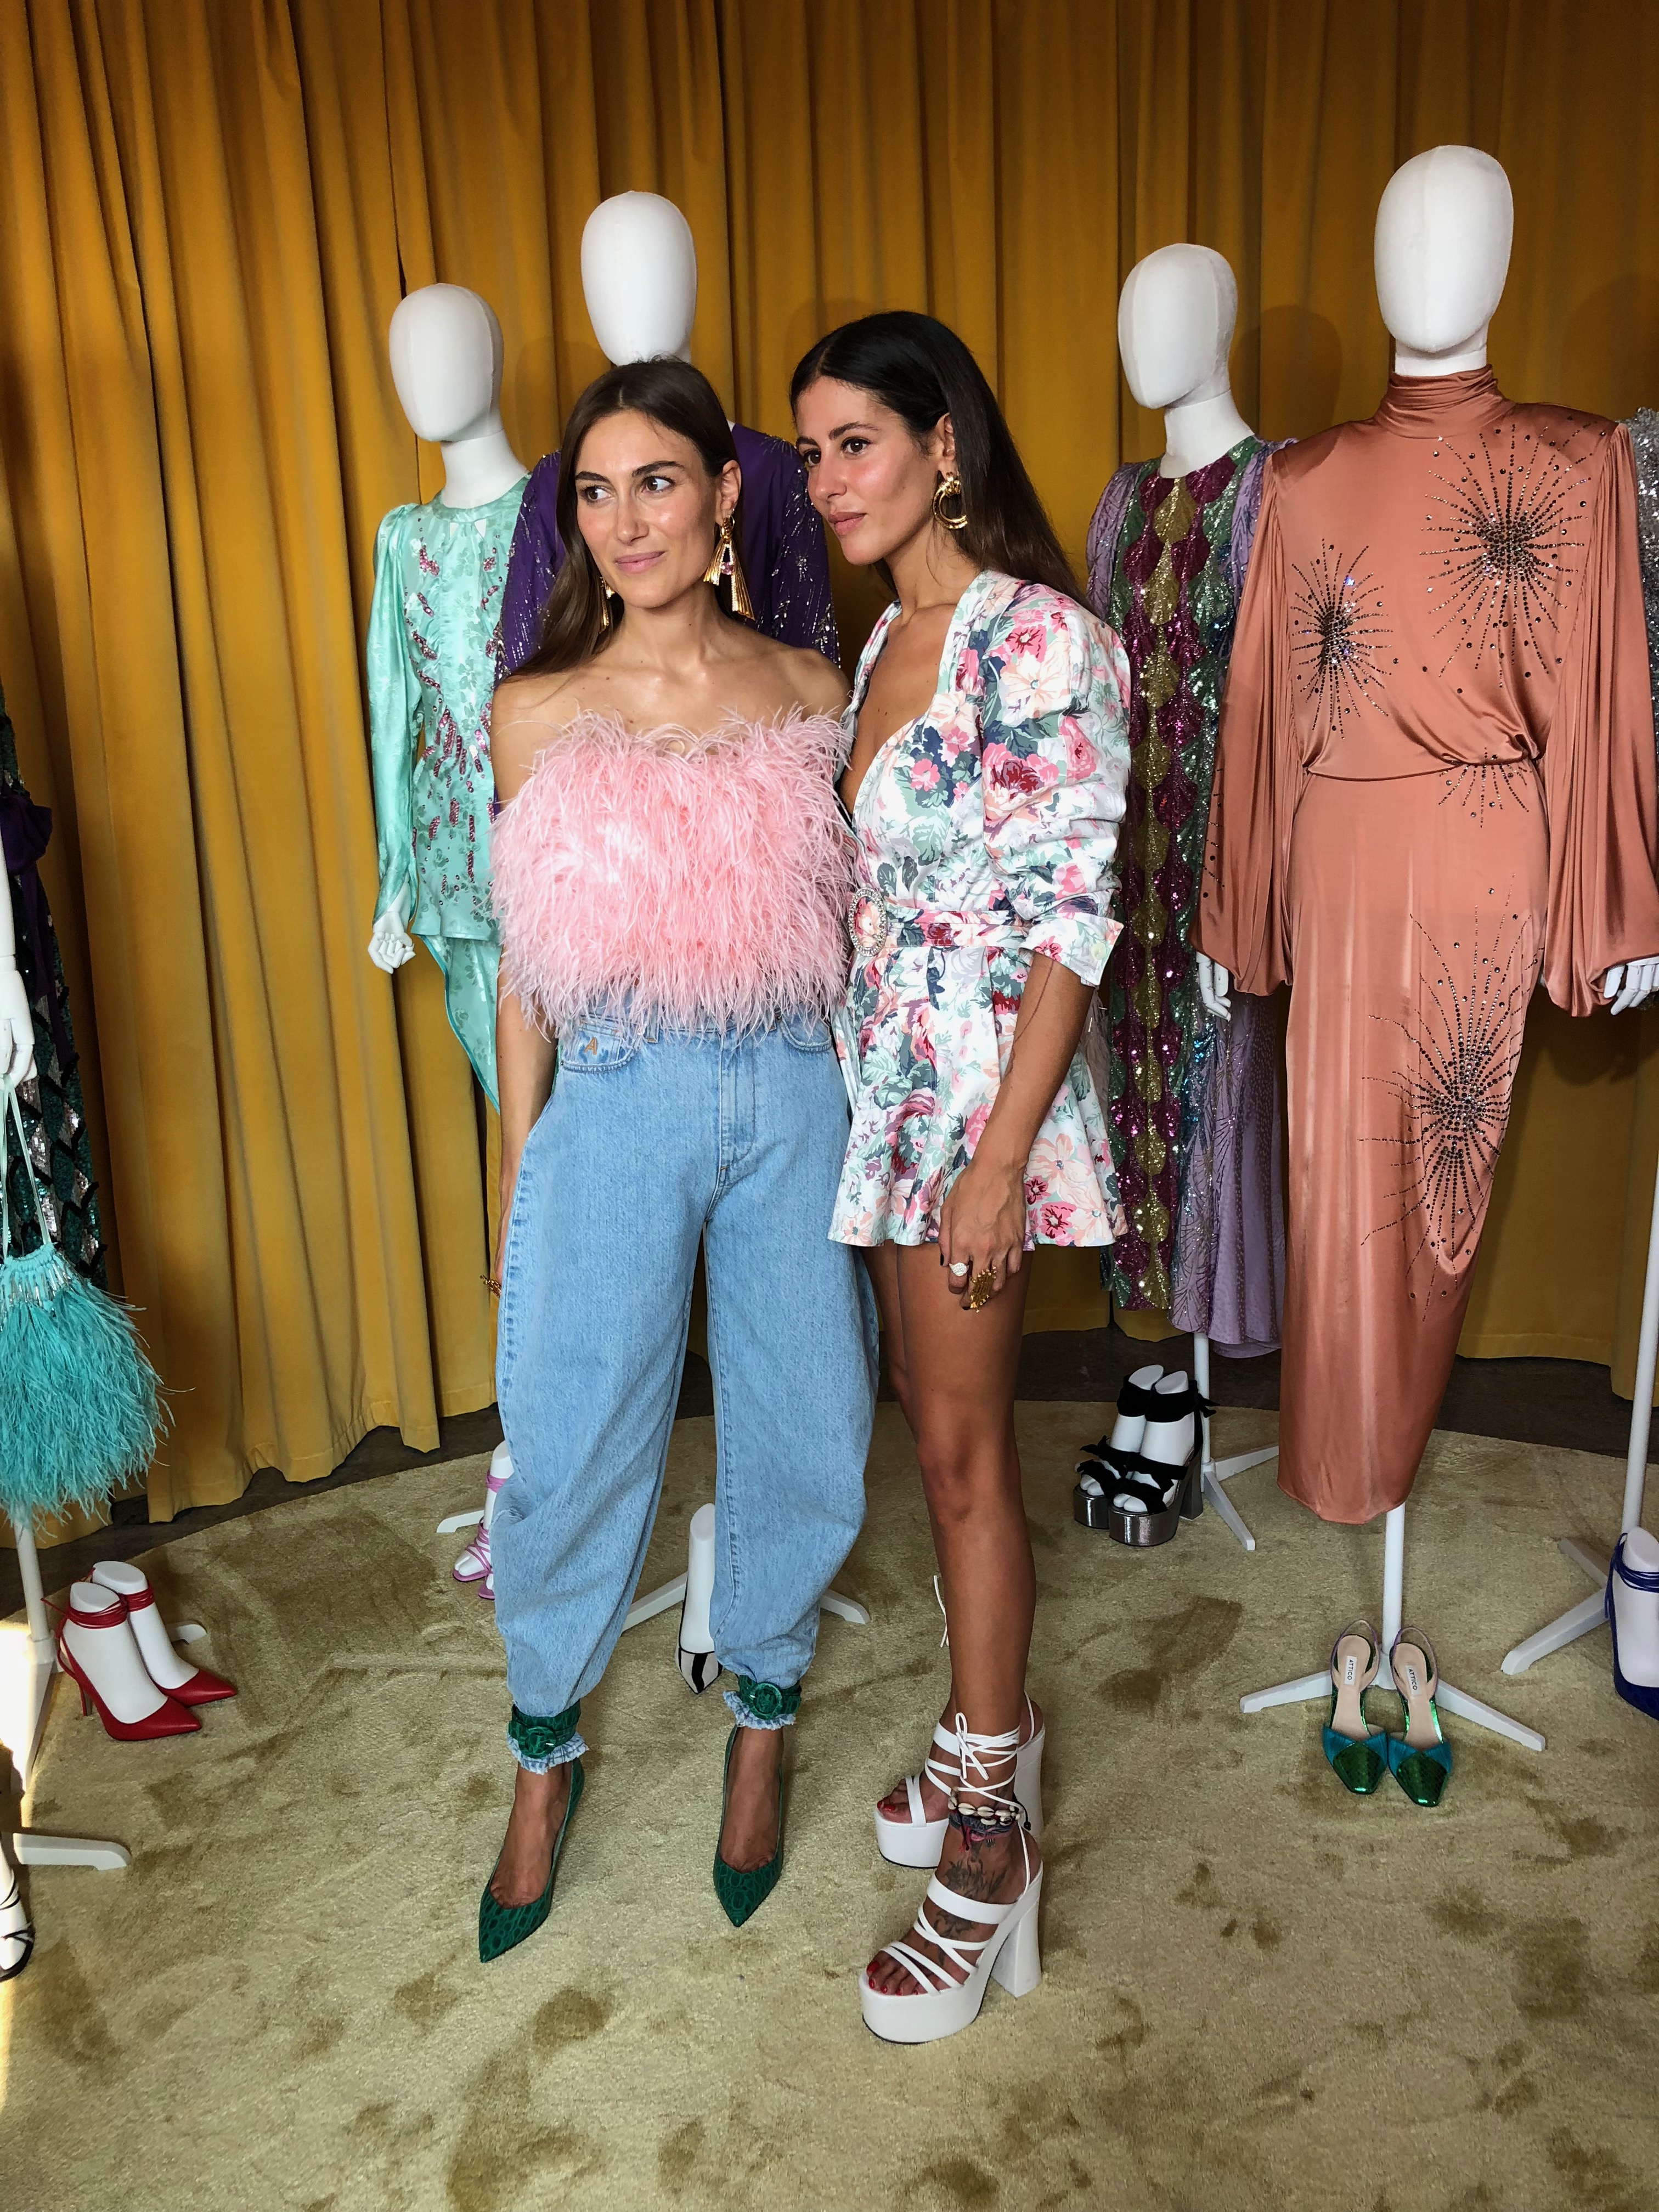 Two women standing in front of mannequins: one wearing a pink feather top with jeans and green heels, the other wearing a mini floral print dress and white wedges